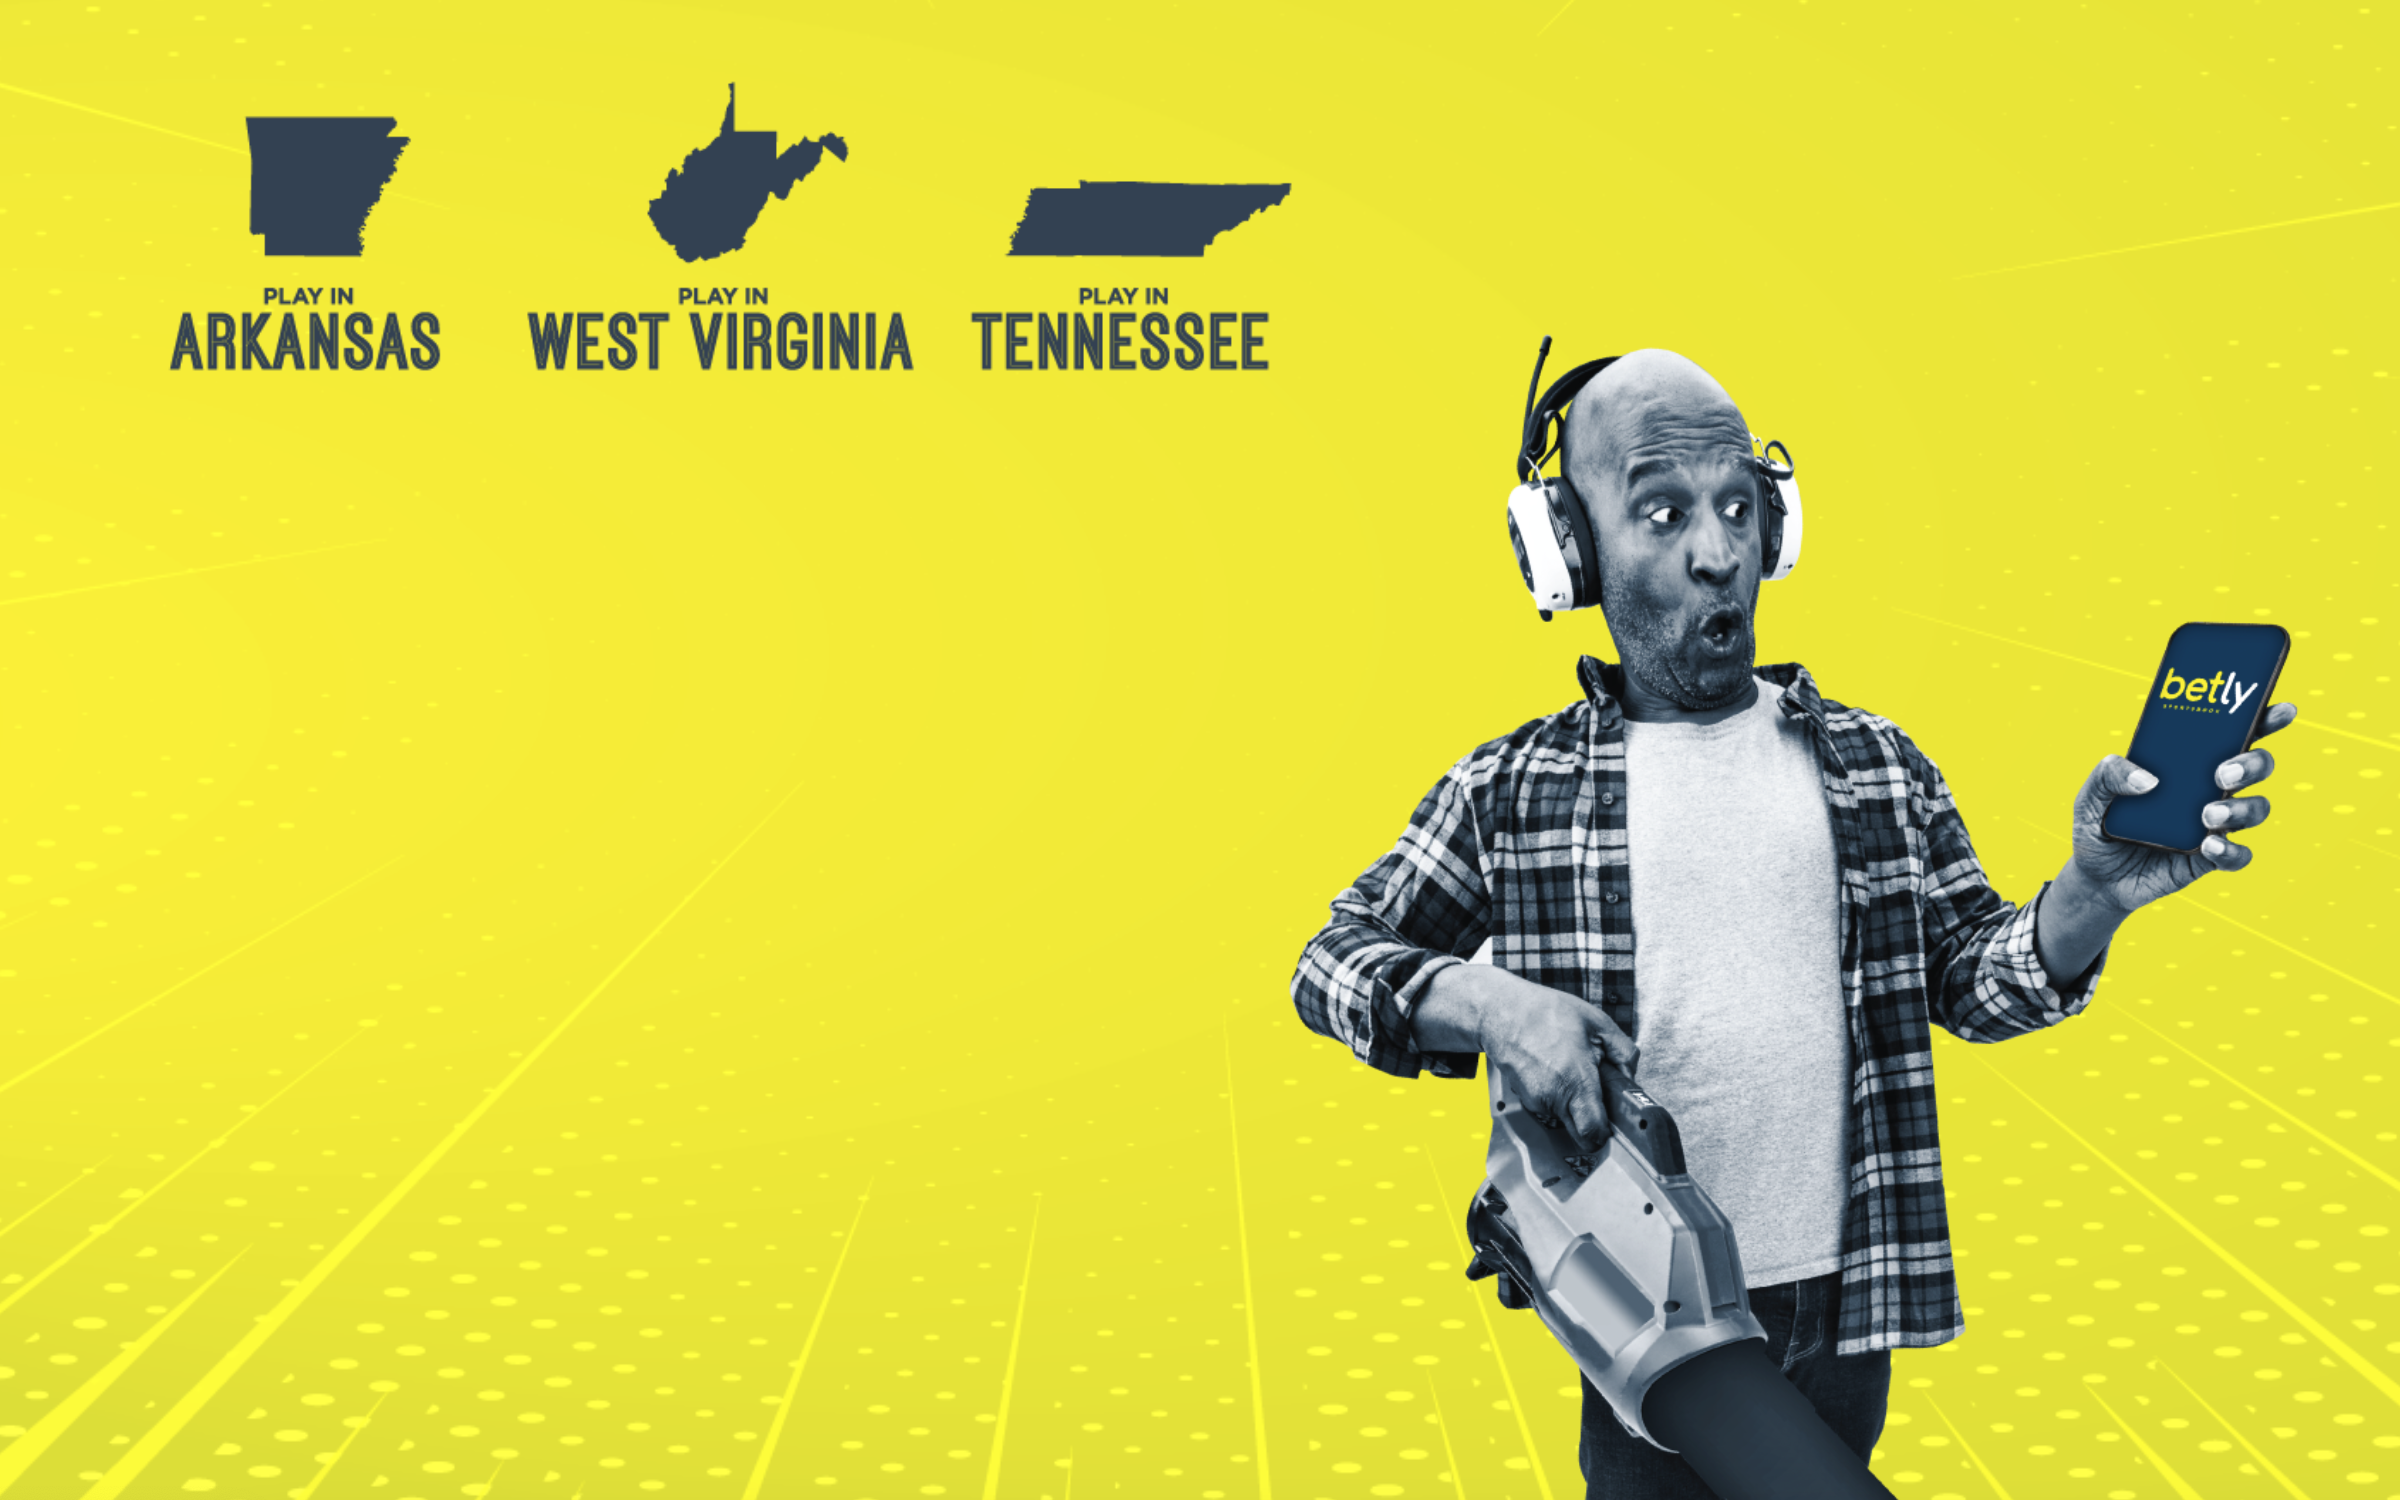 betly-launches-in-tennessee,-becomes-13th-sportsbook-in-volunteer-state